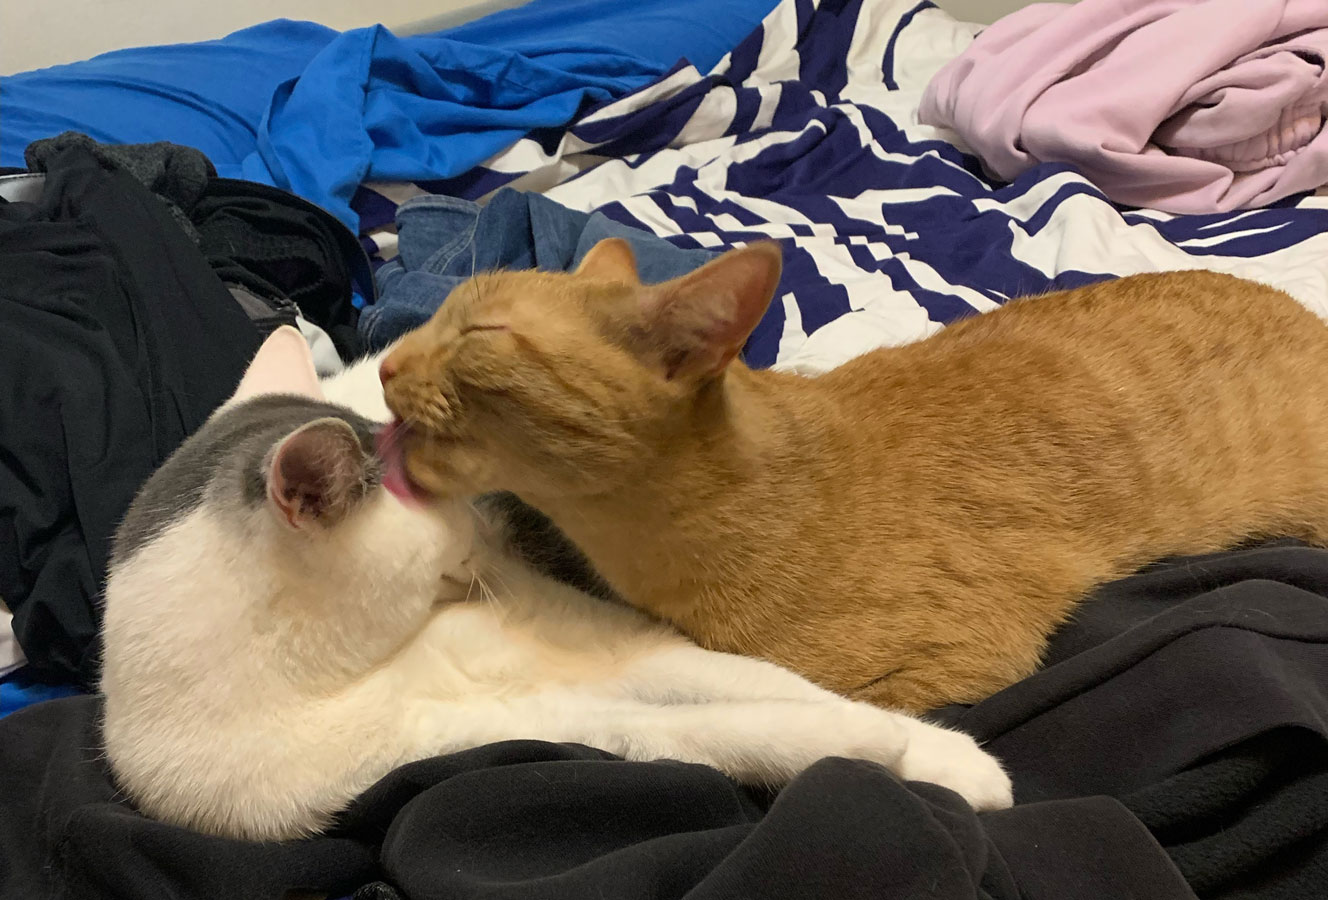 An orange cat loving licks a white cat on a bed.